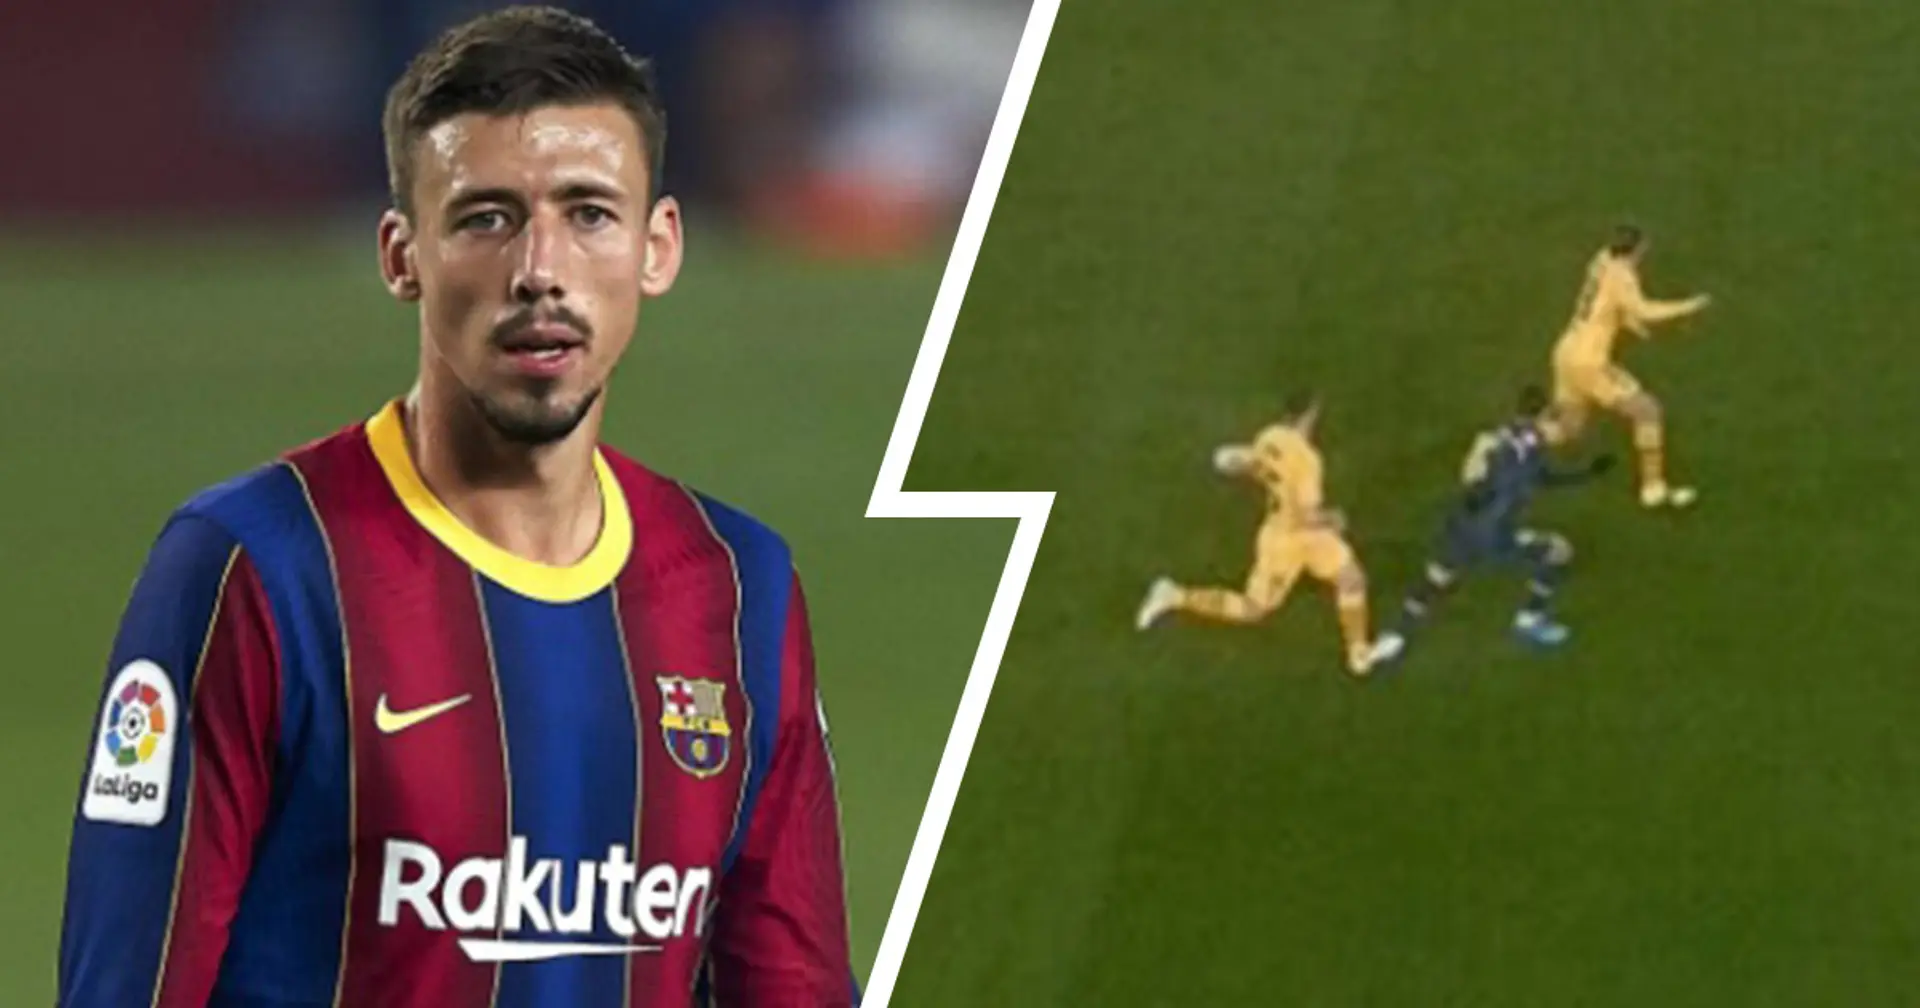 Crazy: No player in Europe's top 5 leagues gives up as many penalties as Clement Lenglet